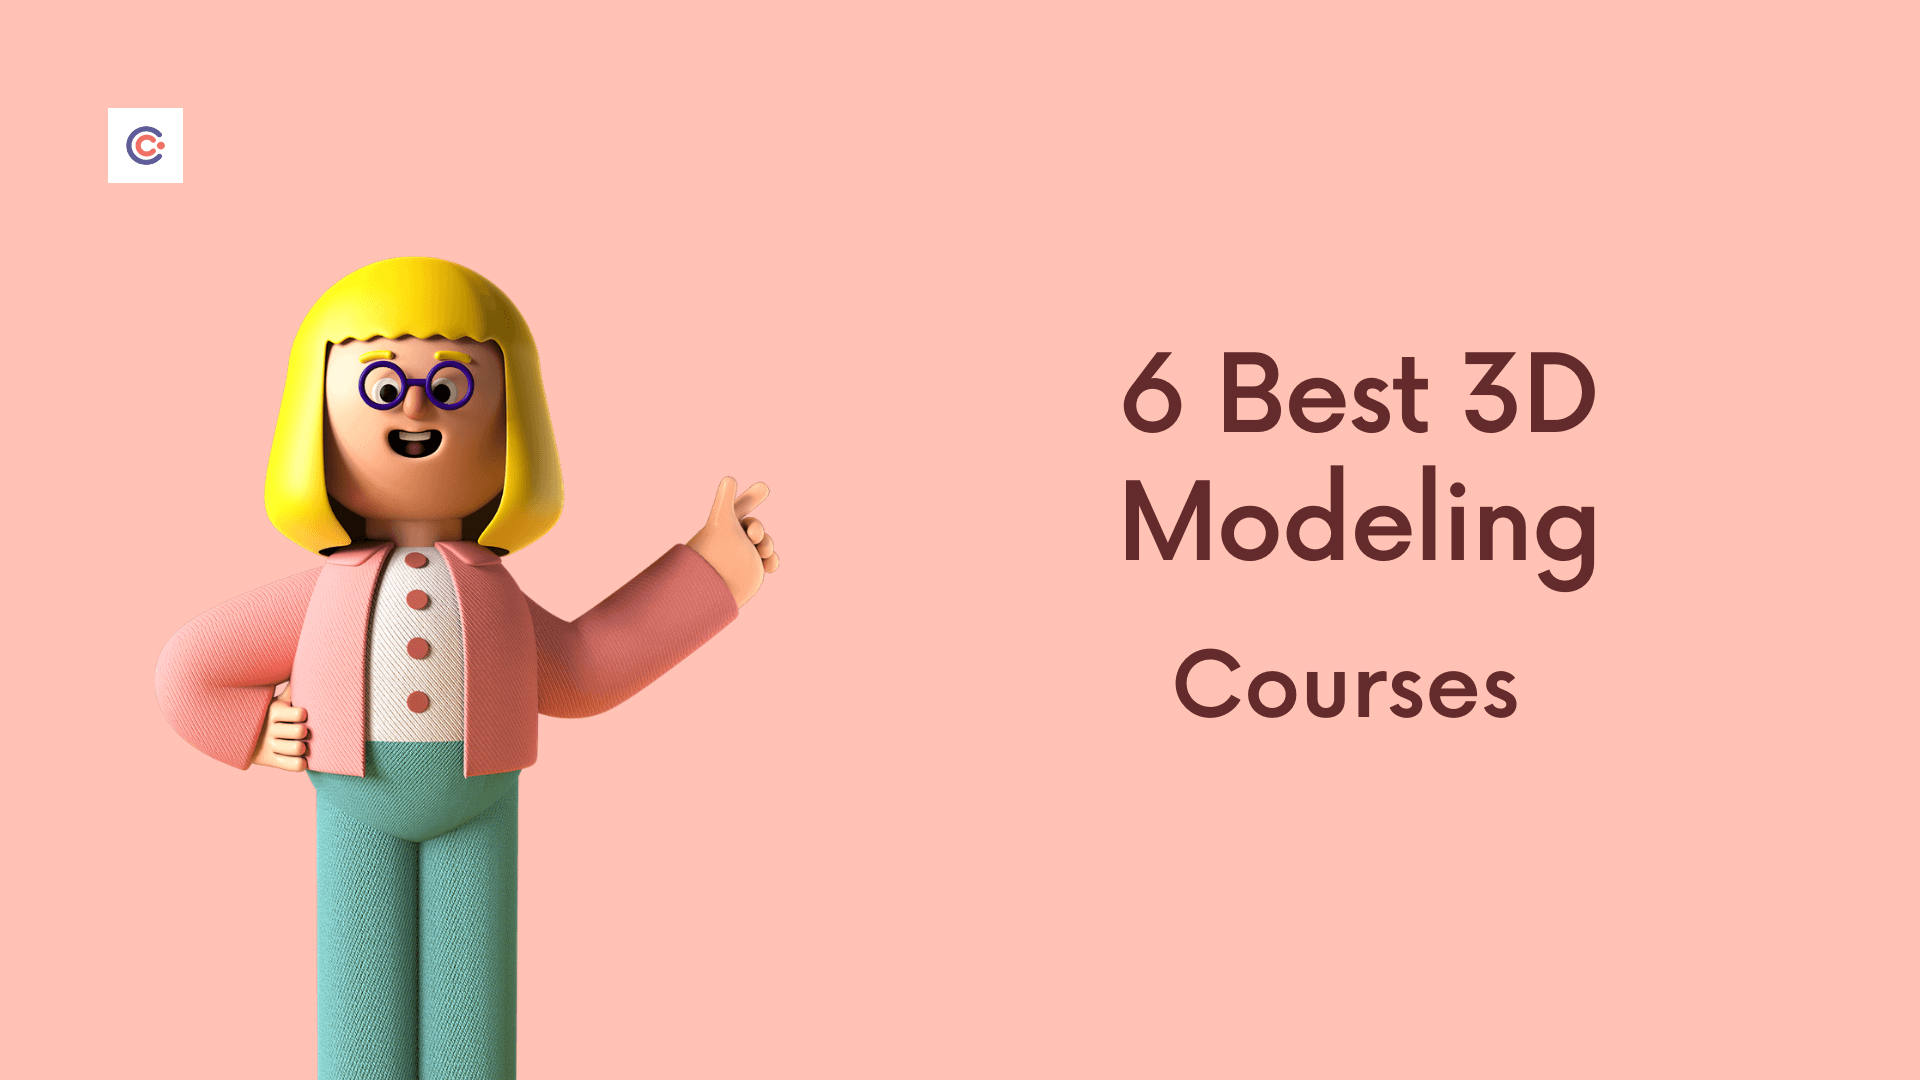 I want some courses related to 3d Modelling